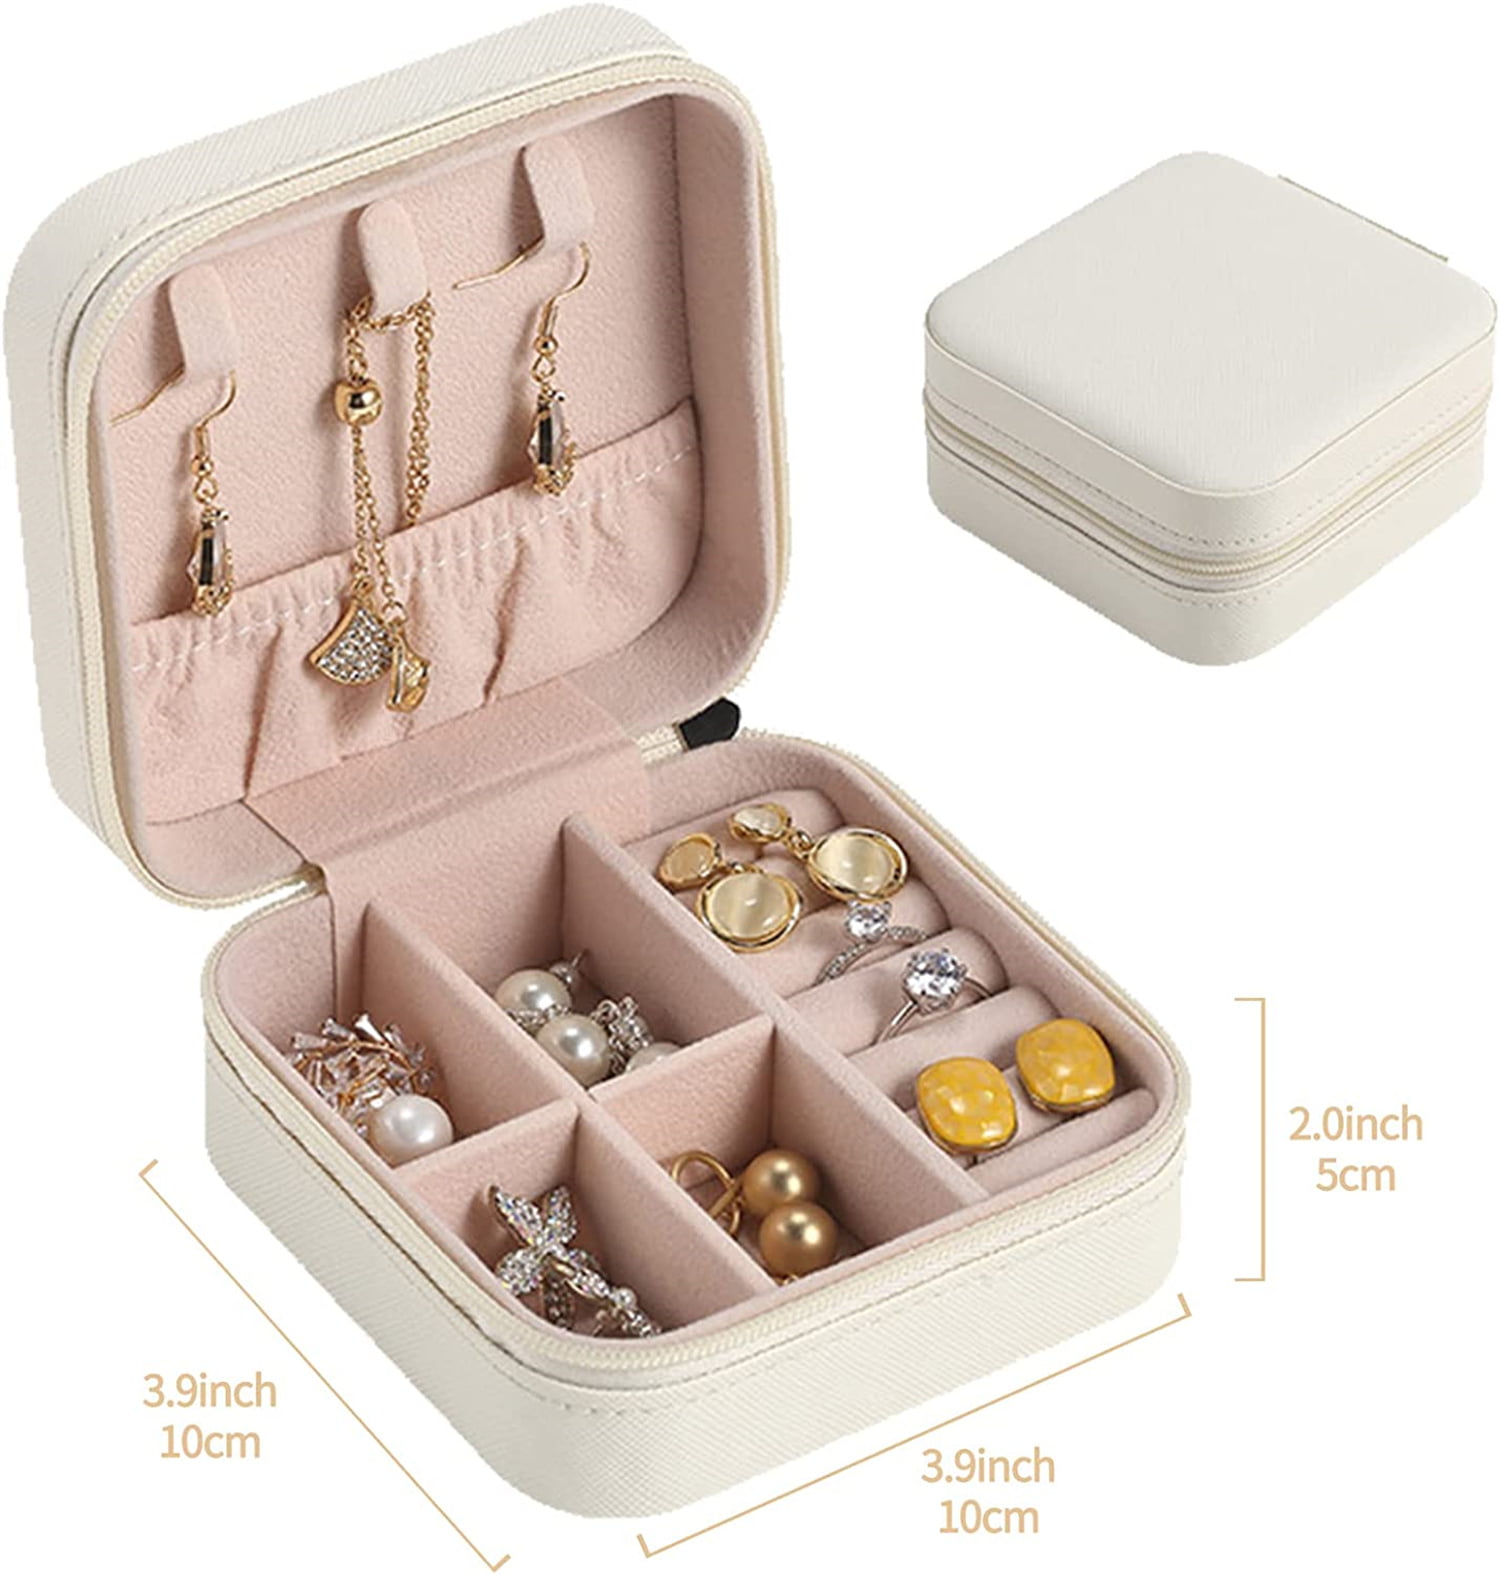 Stackable Travel Jewelry Organizer, Small and Portable Jewelry Storage Box  with PU Leather for Necklaces Holder Earrings Rings Display Cases Gift for